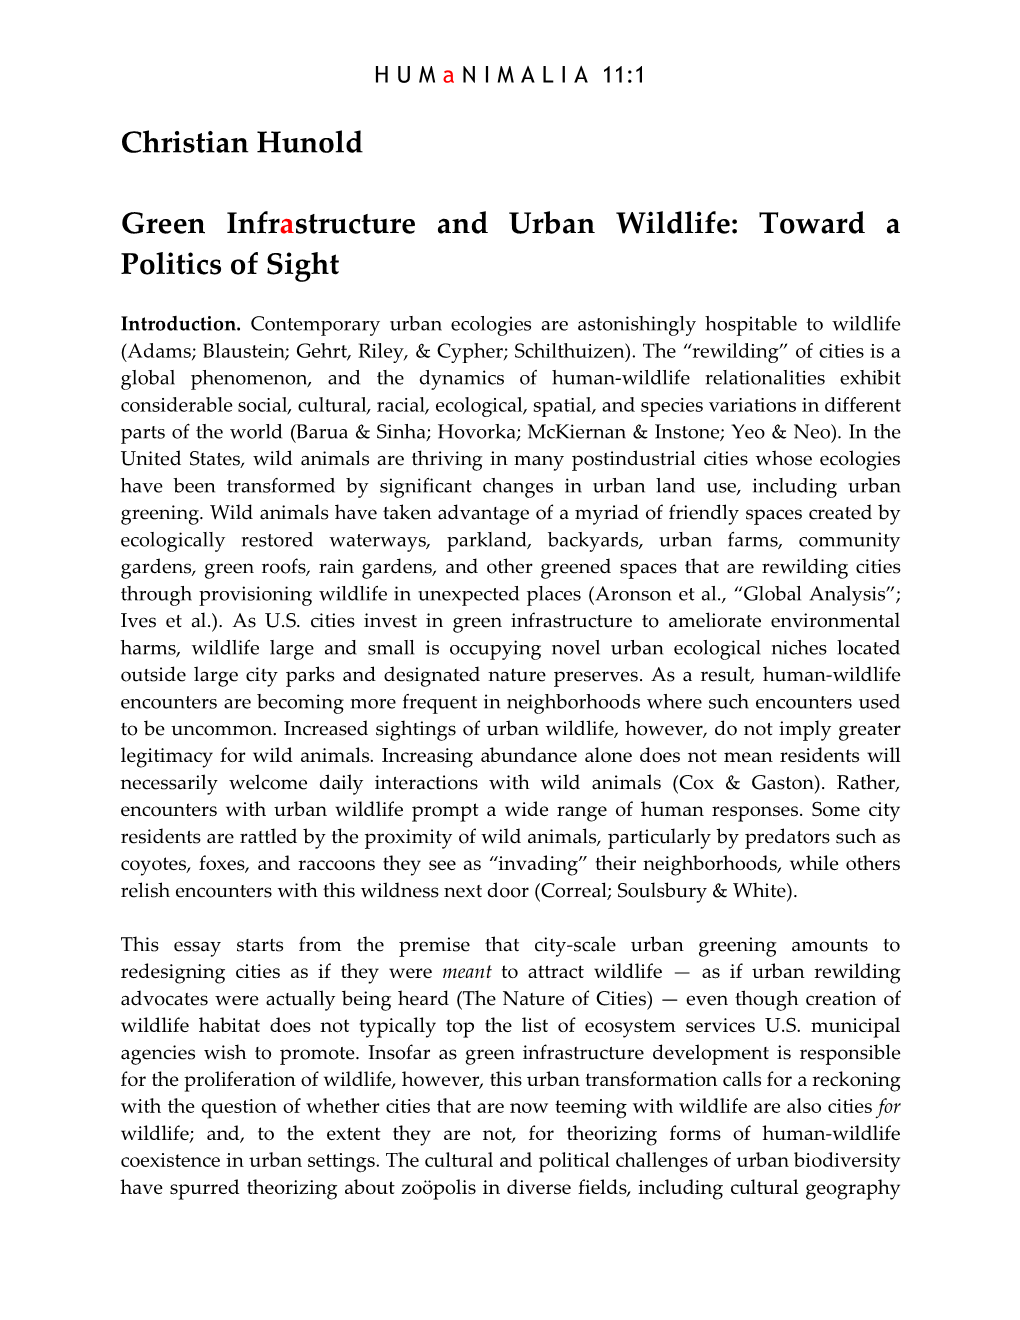 Christian Hunold Green Infrastructure and Urban Wildlife